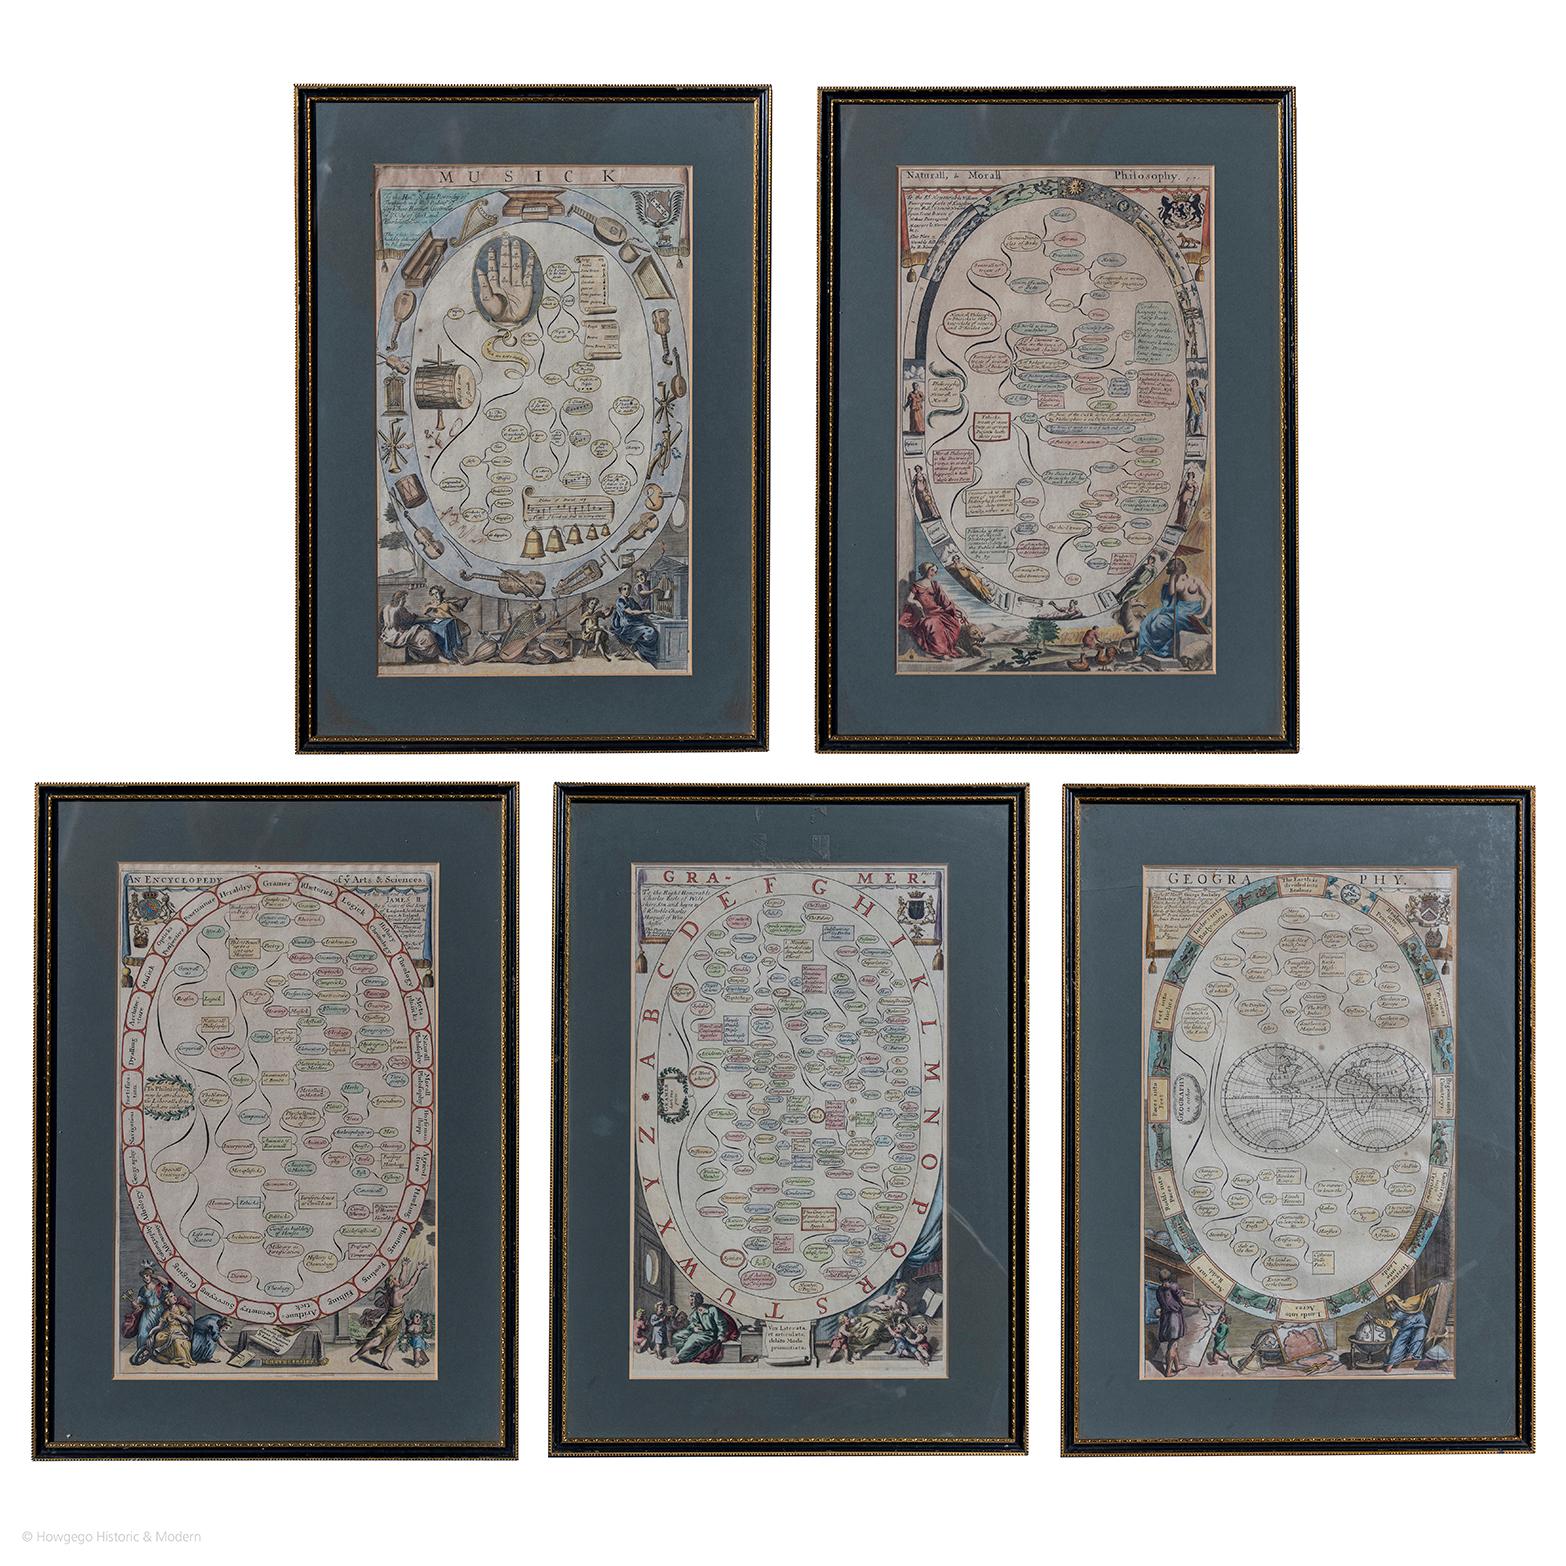 BLOME, Richard (d. 1705). 
A set of 5 framed plates from the first part of The gentlemans recreation in two parts : the first being an encyclopedy of the arts and sciences ... the second part treats of horsmanship, hawking, hunting, fowling,